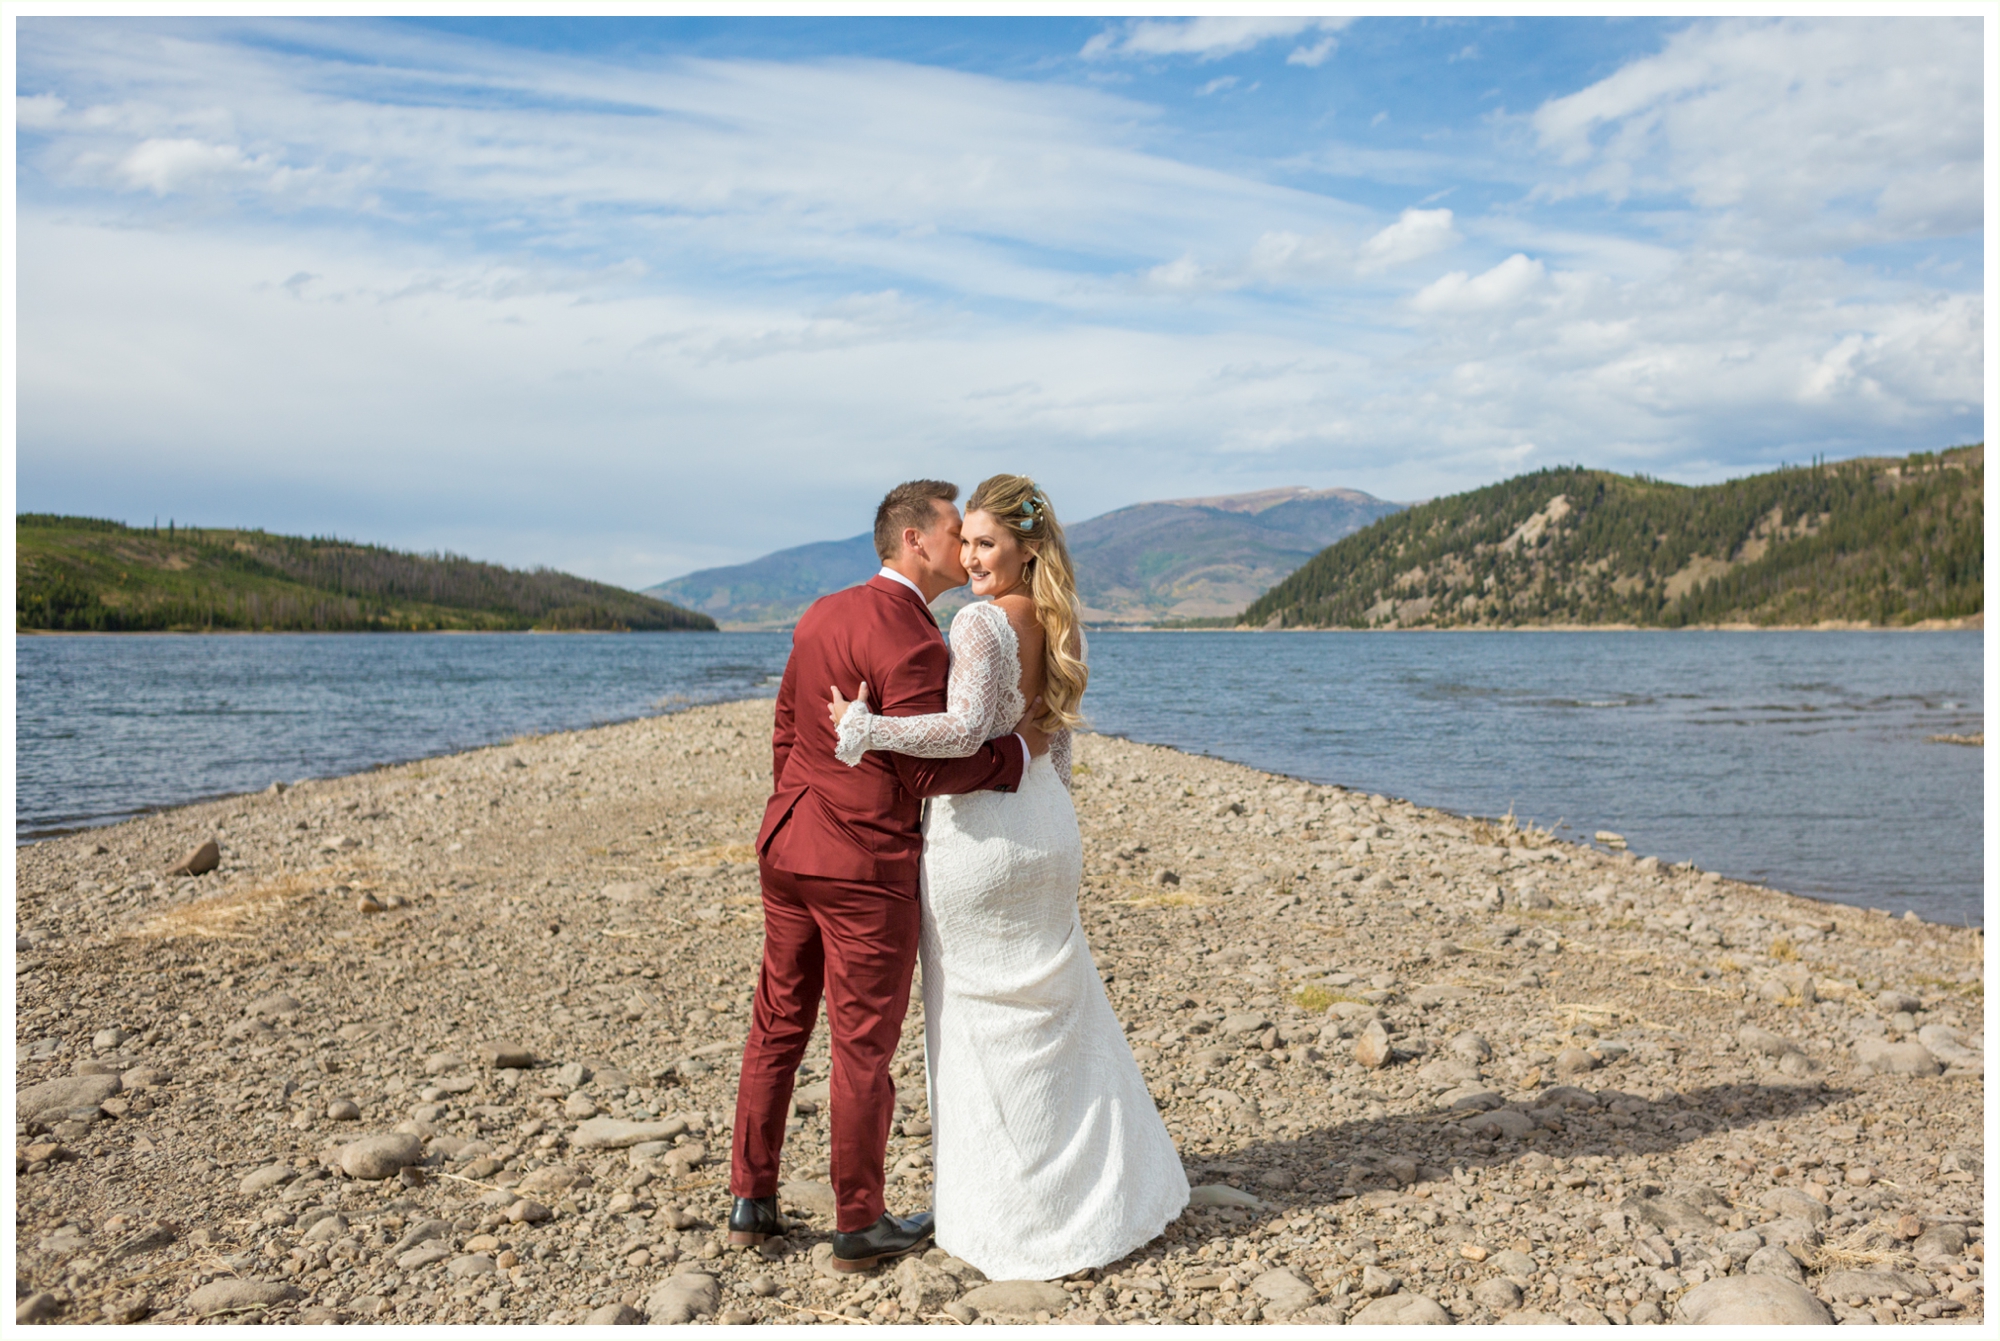 bride and groom photos at lake dillon before sapphire point elopement groom wears maroon suit bride has long sleeved dress